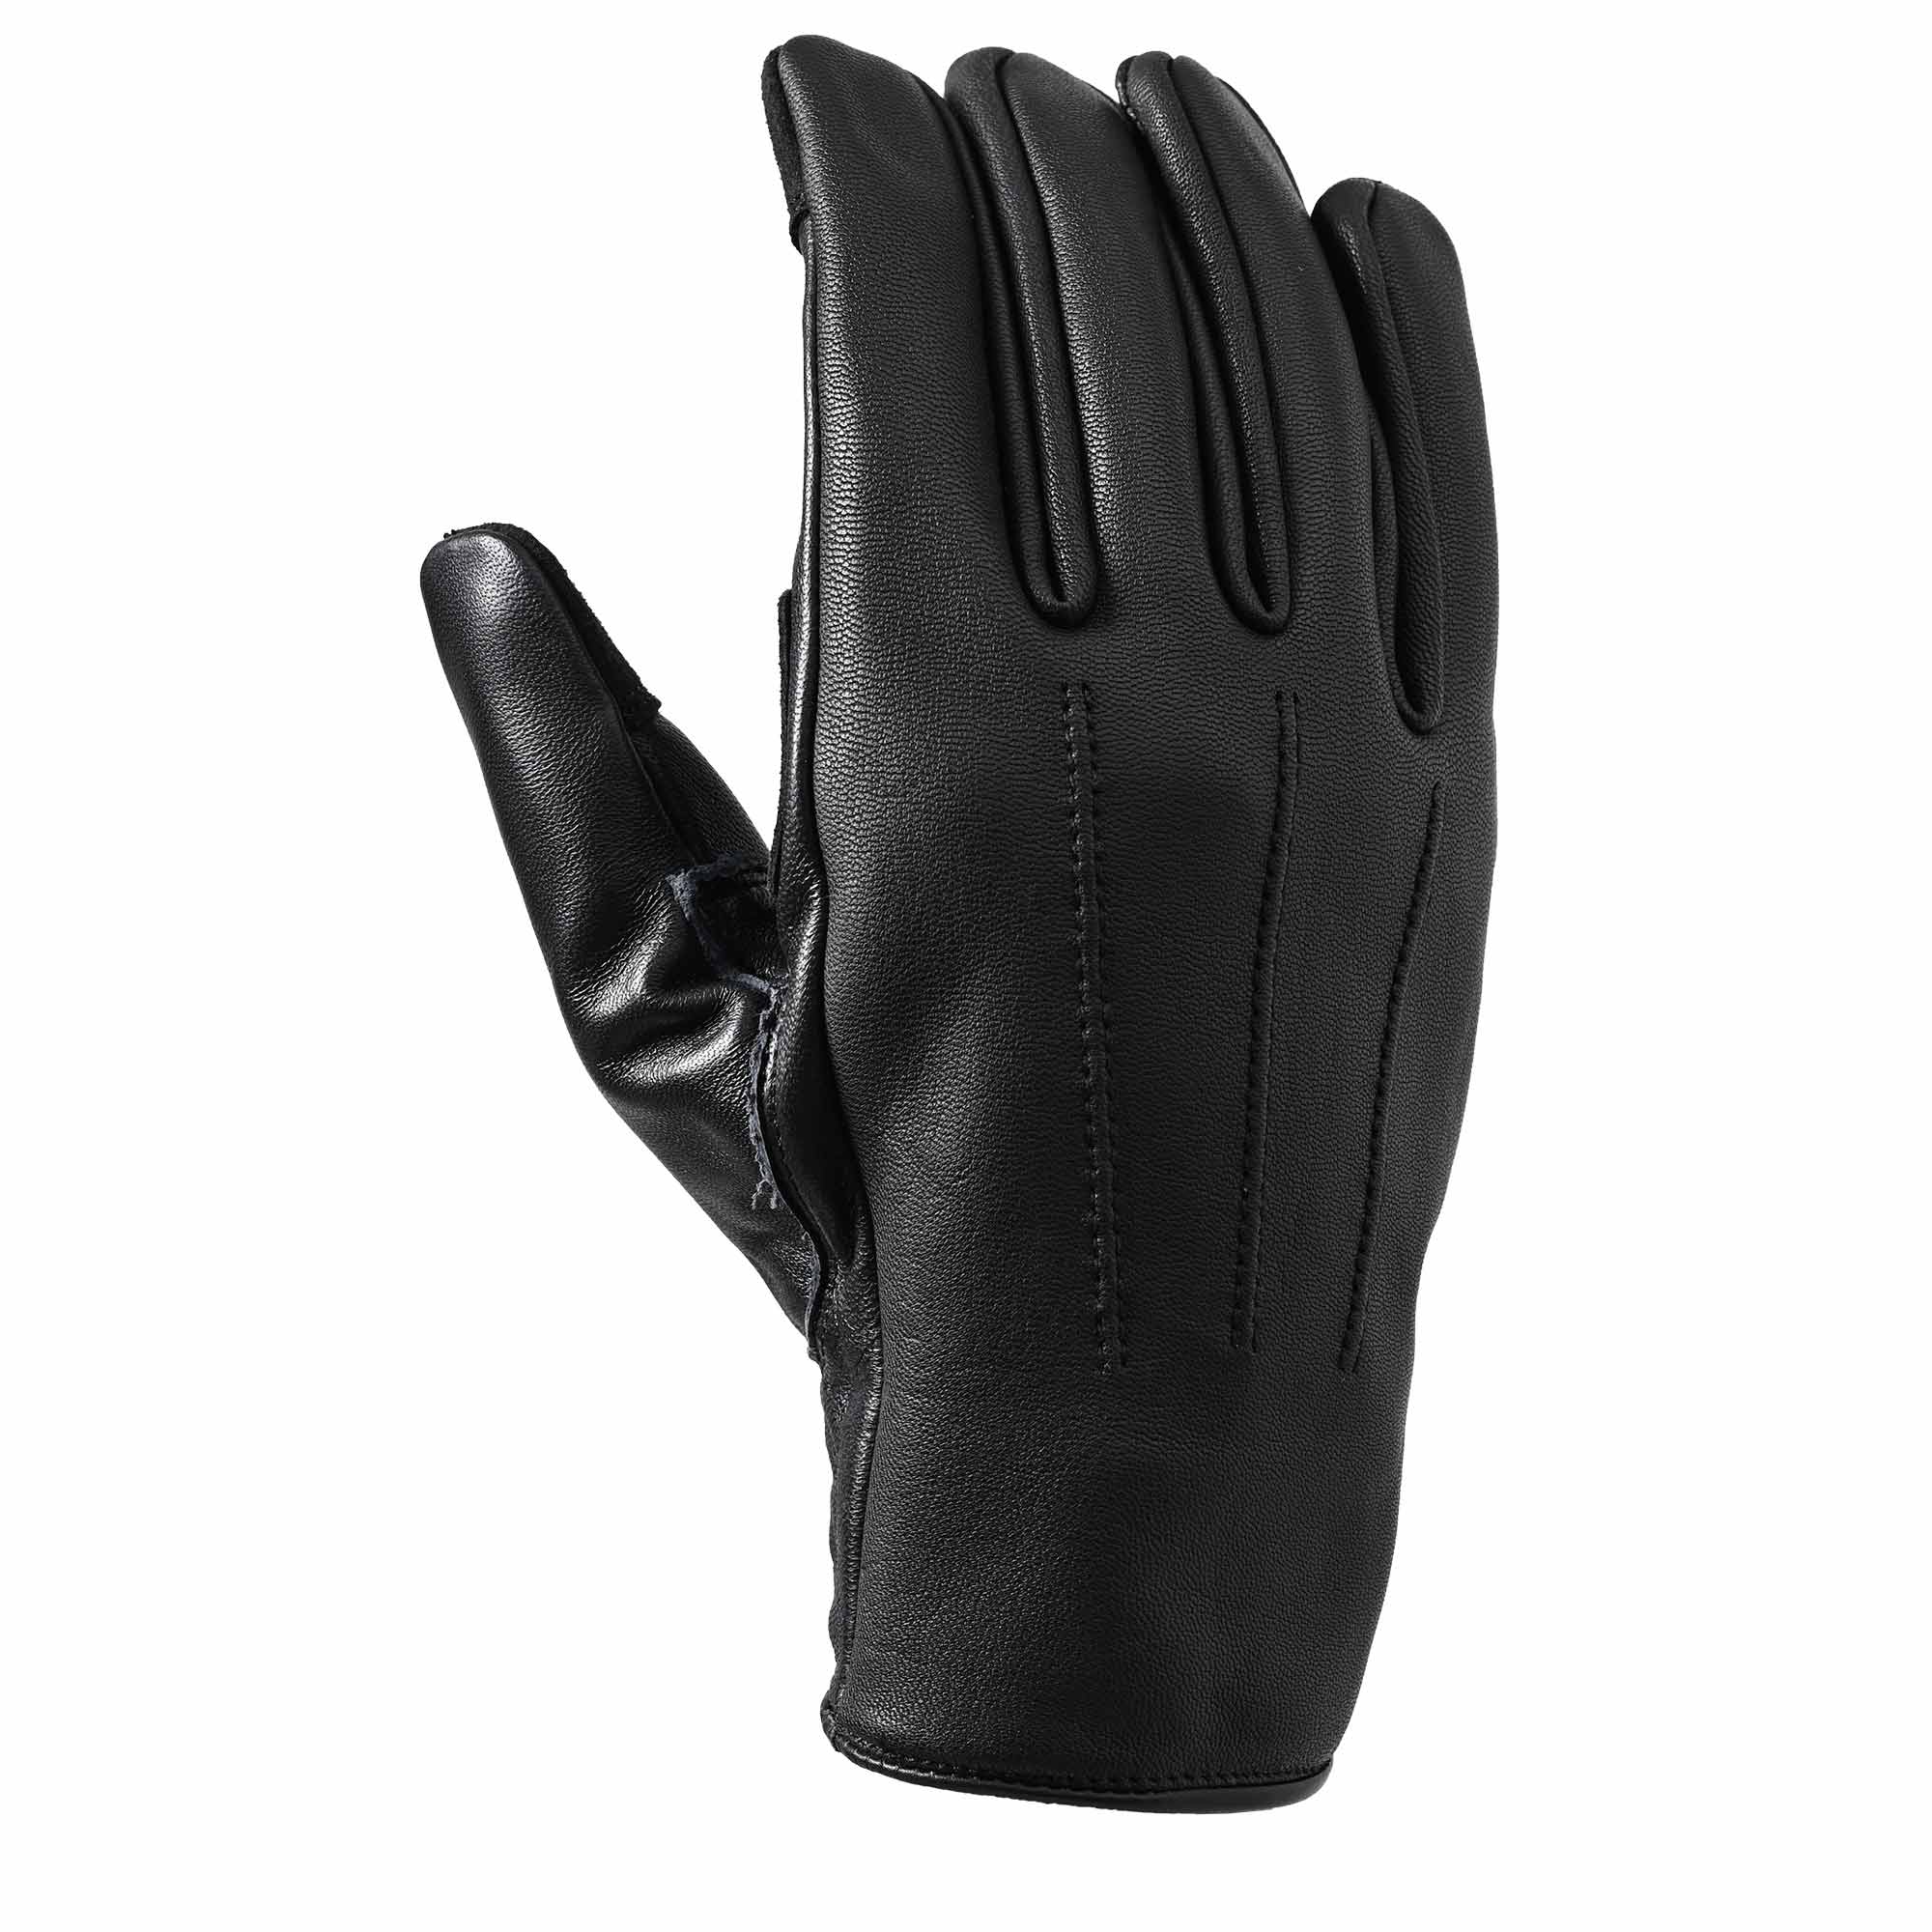 This is the motorcycle leather glove that goes well with your suit